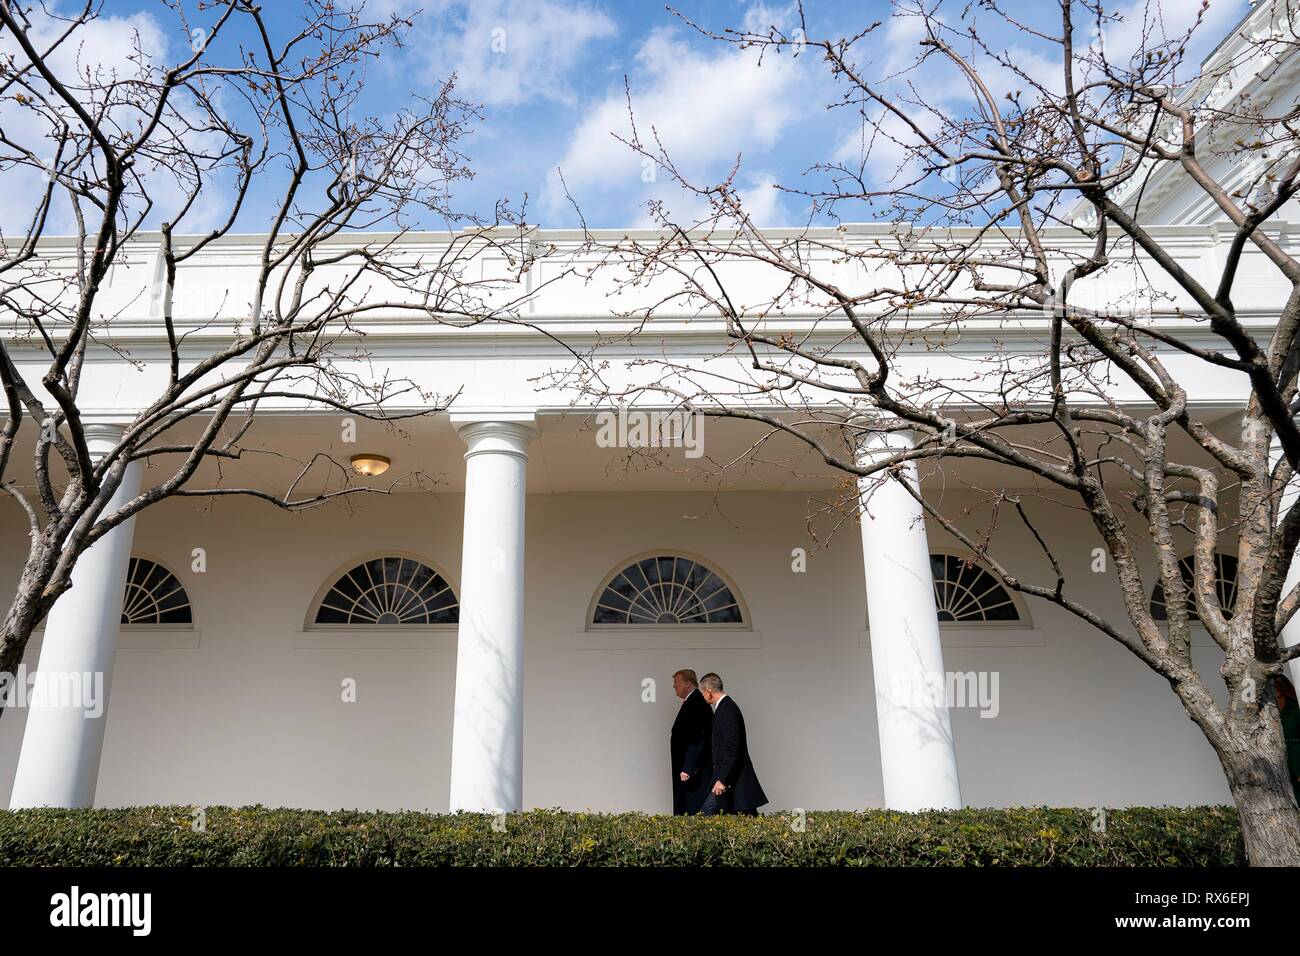 U.S President Donald Trump escorts Czech Prime Minister Andrej Babis to the Oval Office along the Colonnade of the White House March 7, 2019 in Washington, DC. Stock Photo